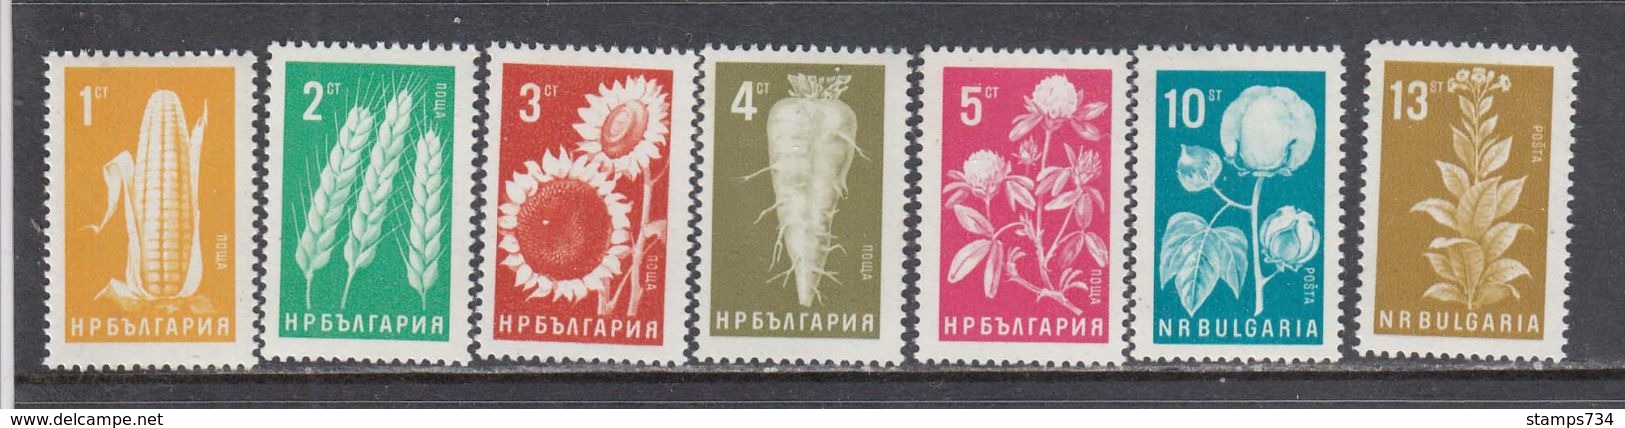 Bulgaria 1965 - Agricultural Products, Mi-Nr. 1522/28, MNH** - Unused Stamps